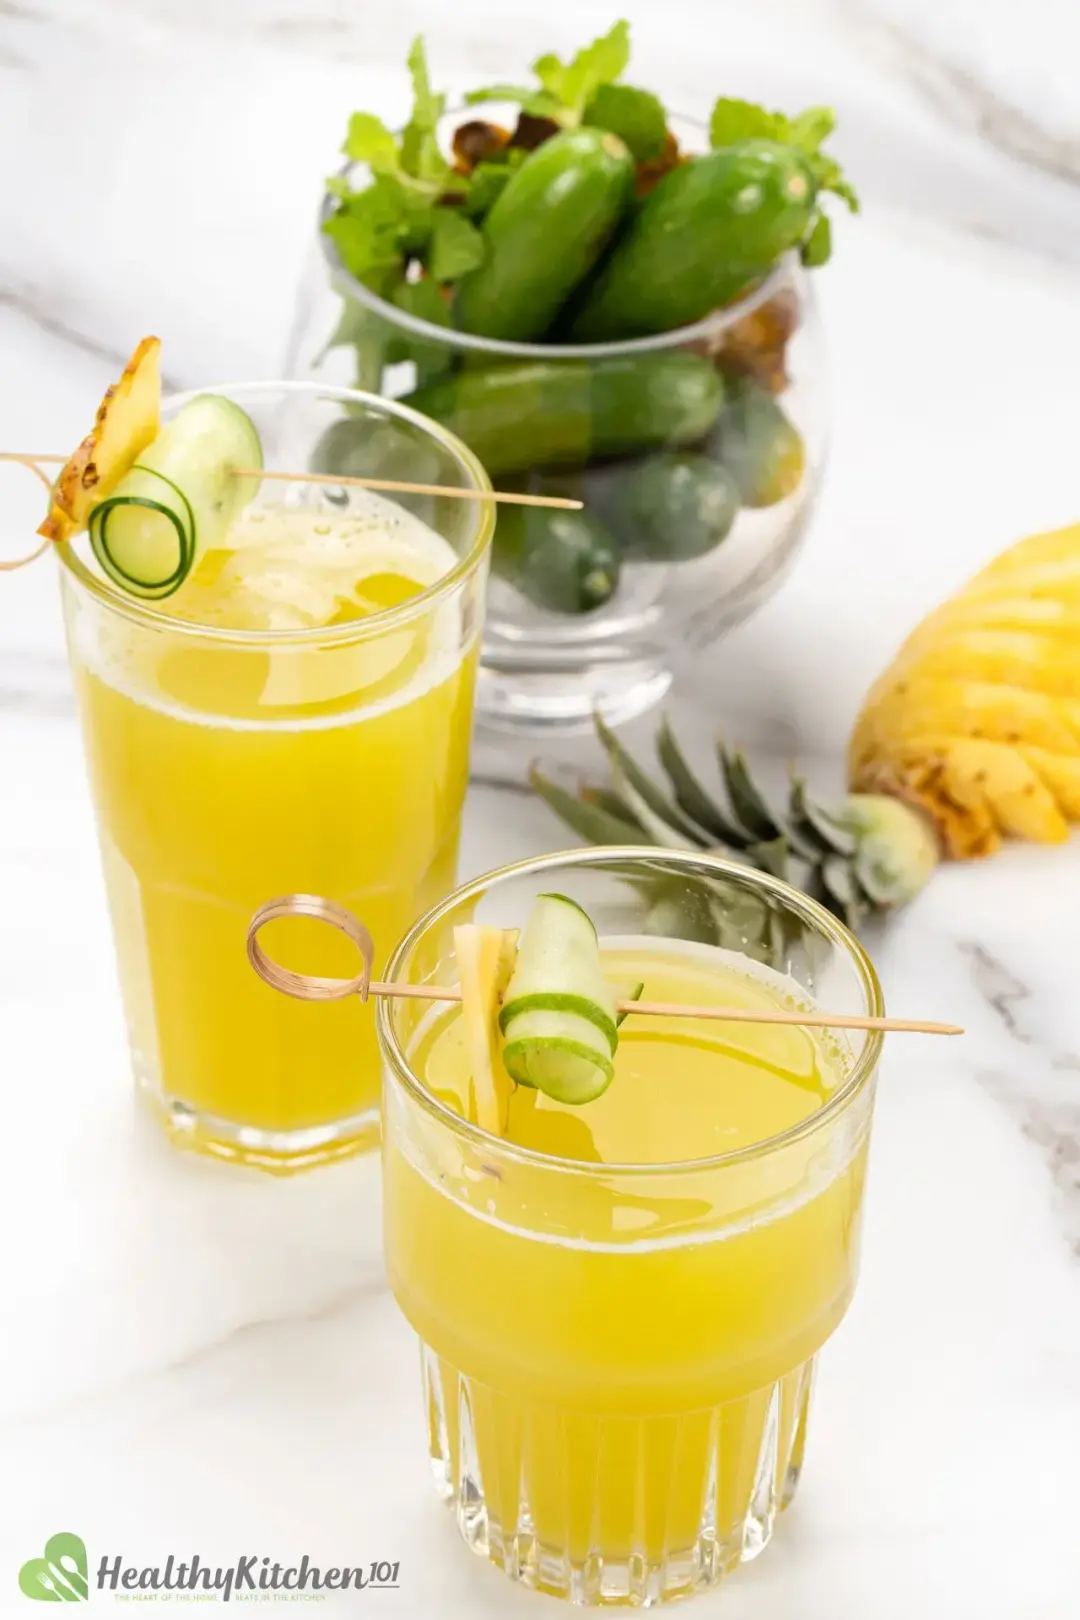 Can I Drink Pineapple Cucumber Juice at Night